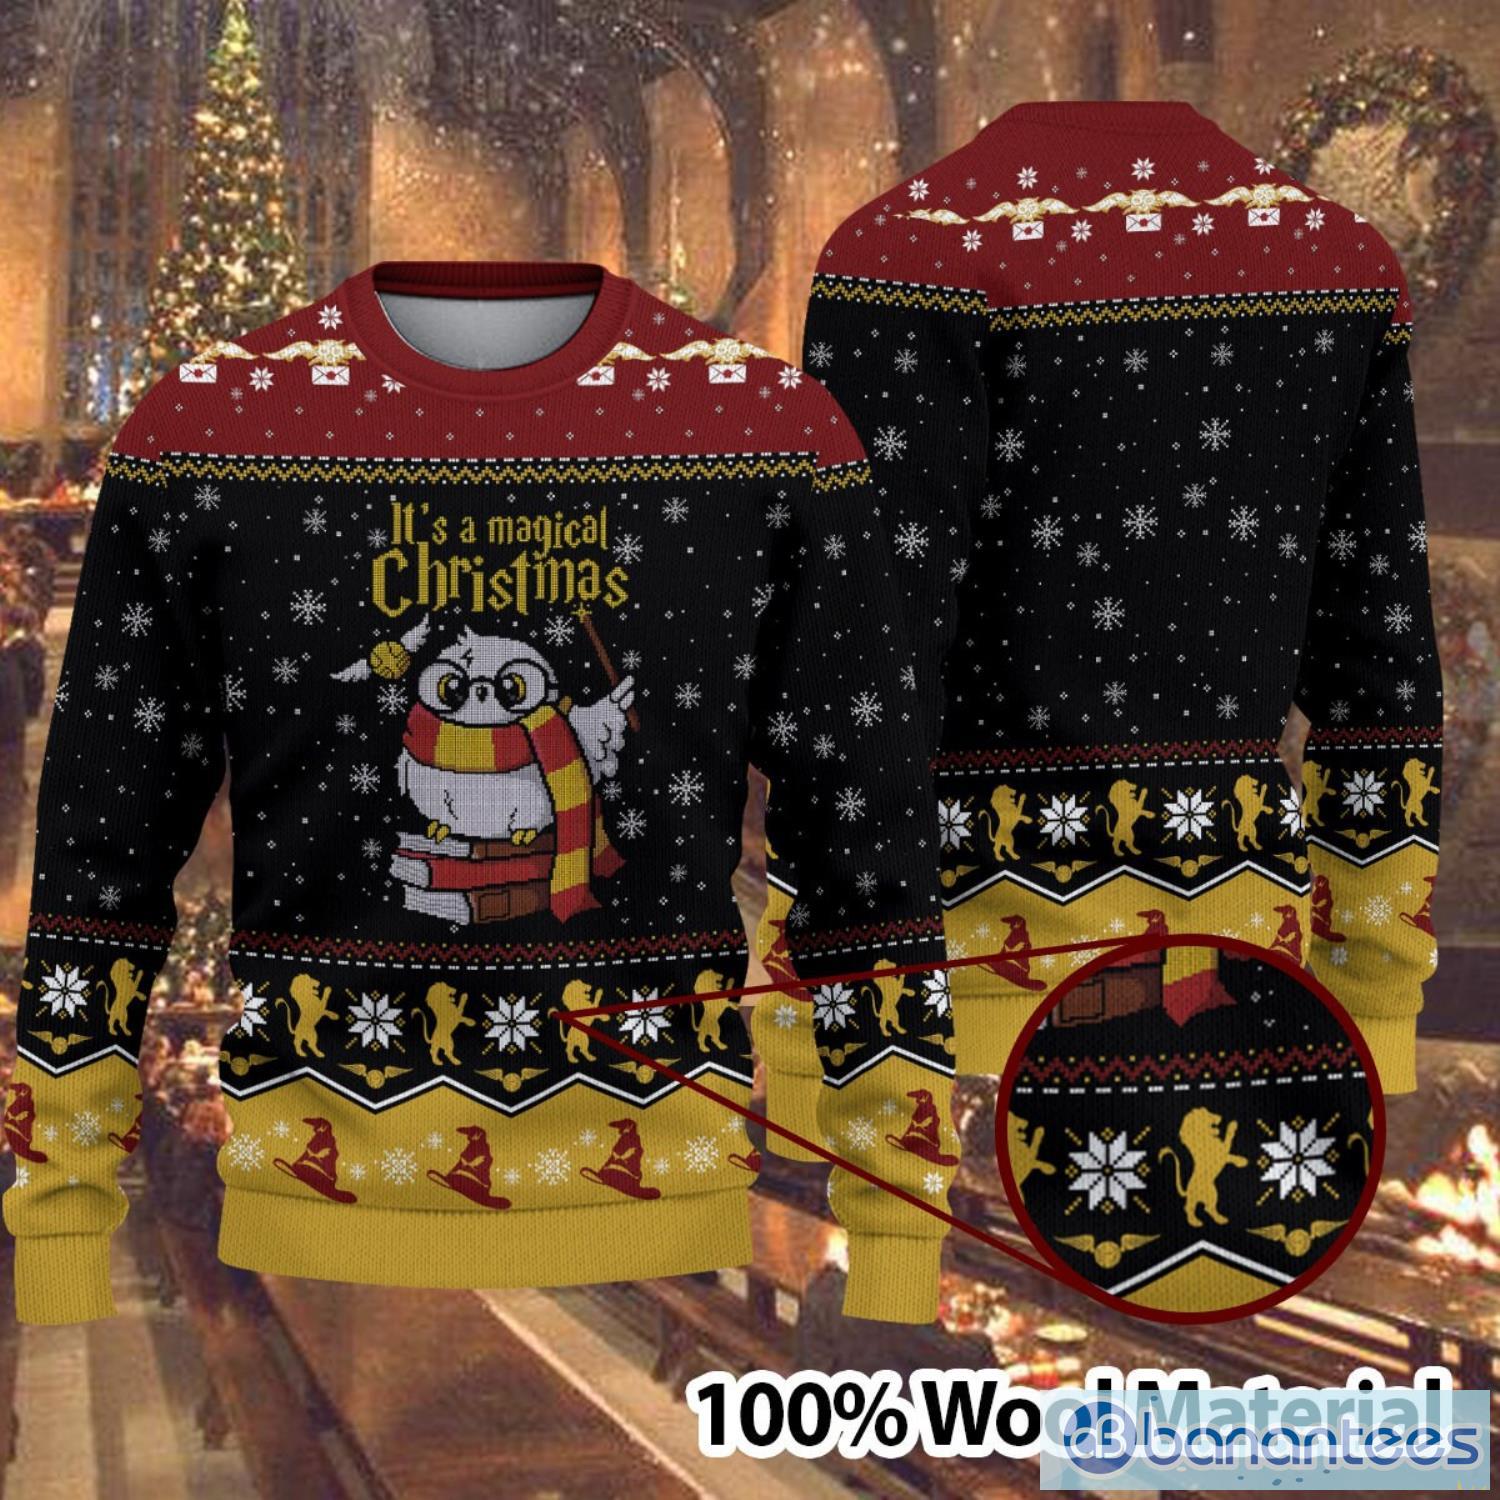 It’s A Magical Christmas Ugly Sweater Hedwig Movies Product Photo 1